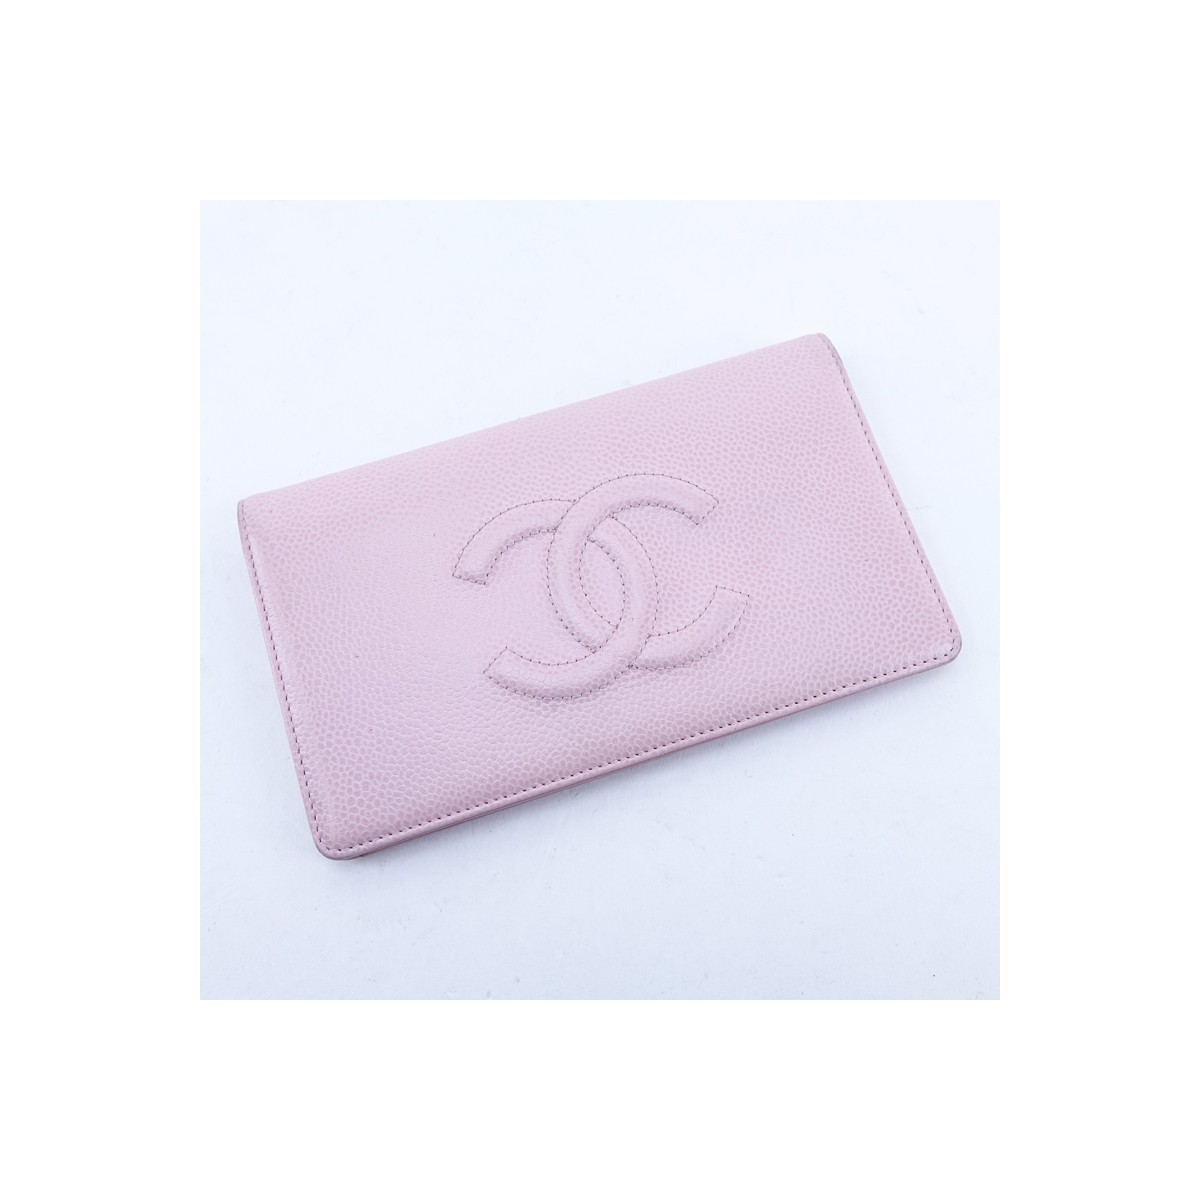 Chanel Pink Caviar Leather Front Logo Long Wallet. Interior with 8 slots, zippered change pocket.